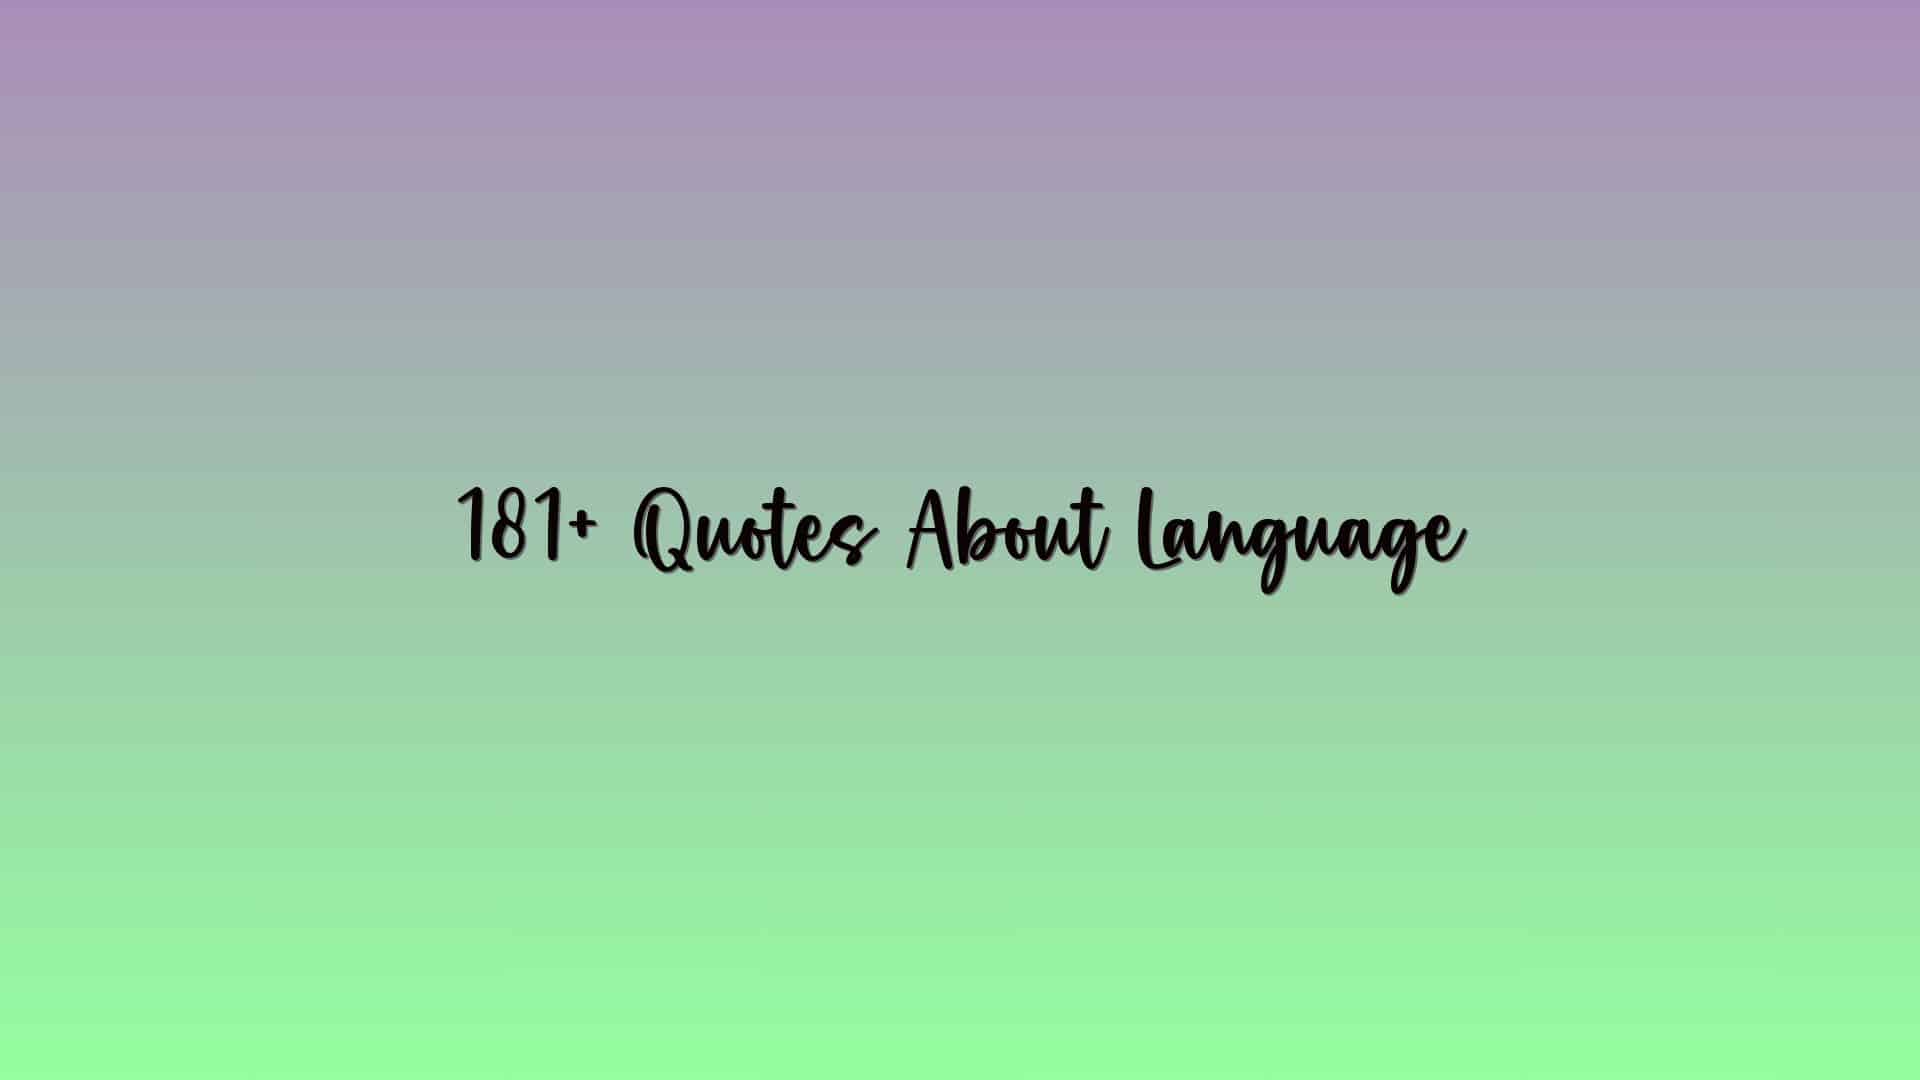 181+ Quotes About Language